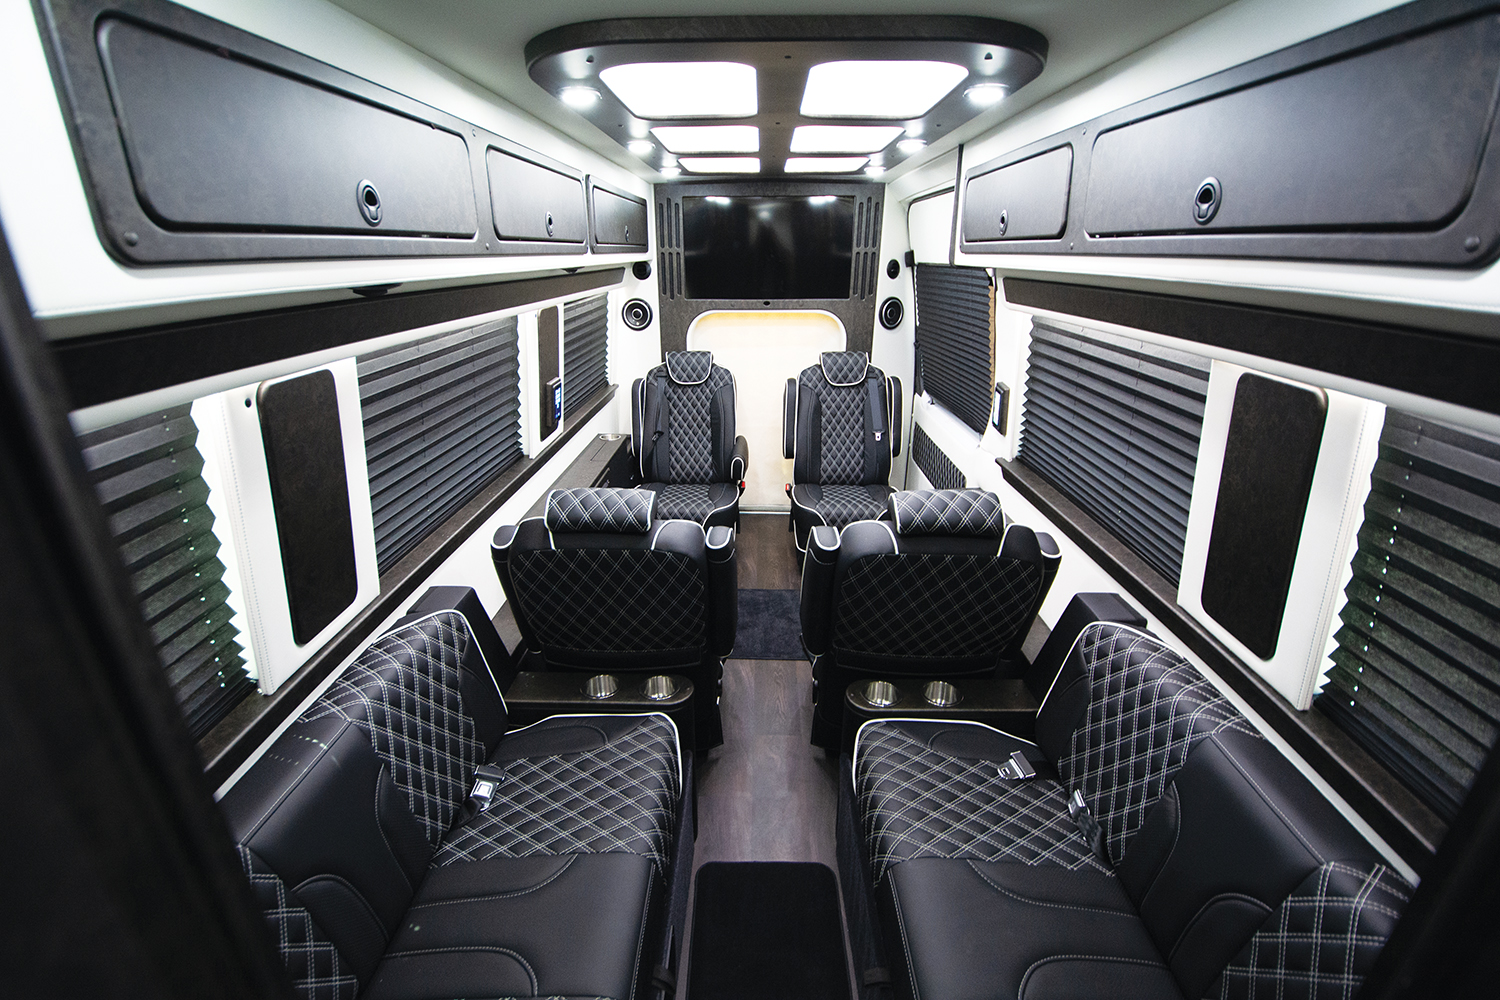 LUXE and Executive Luxury Sprinter Vans Now Available at Luxury Auto